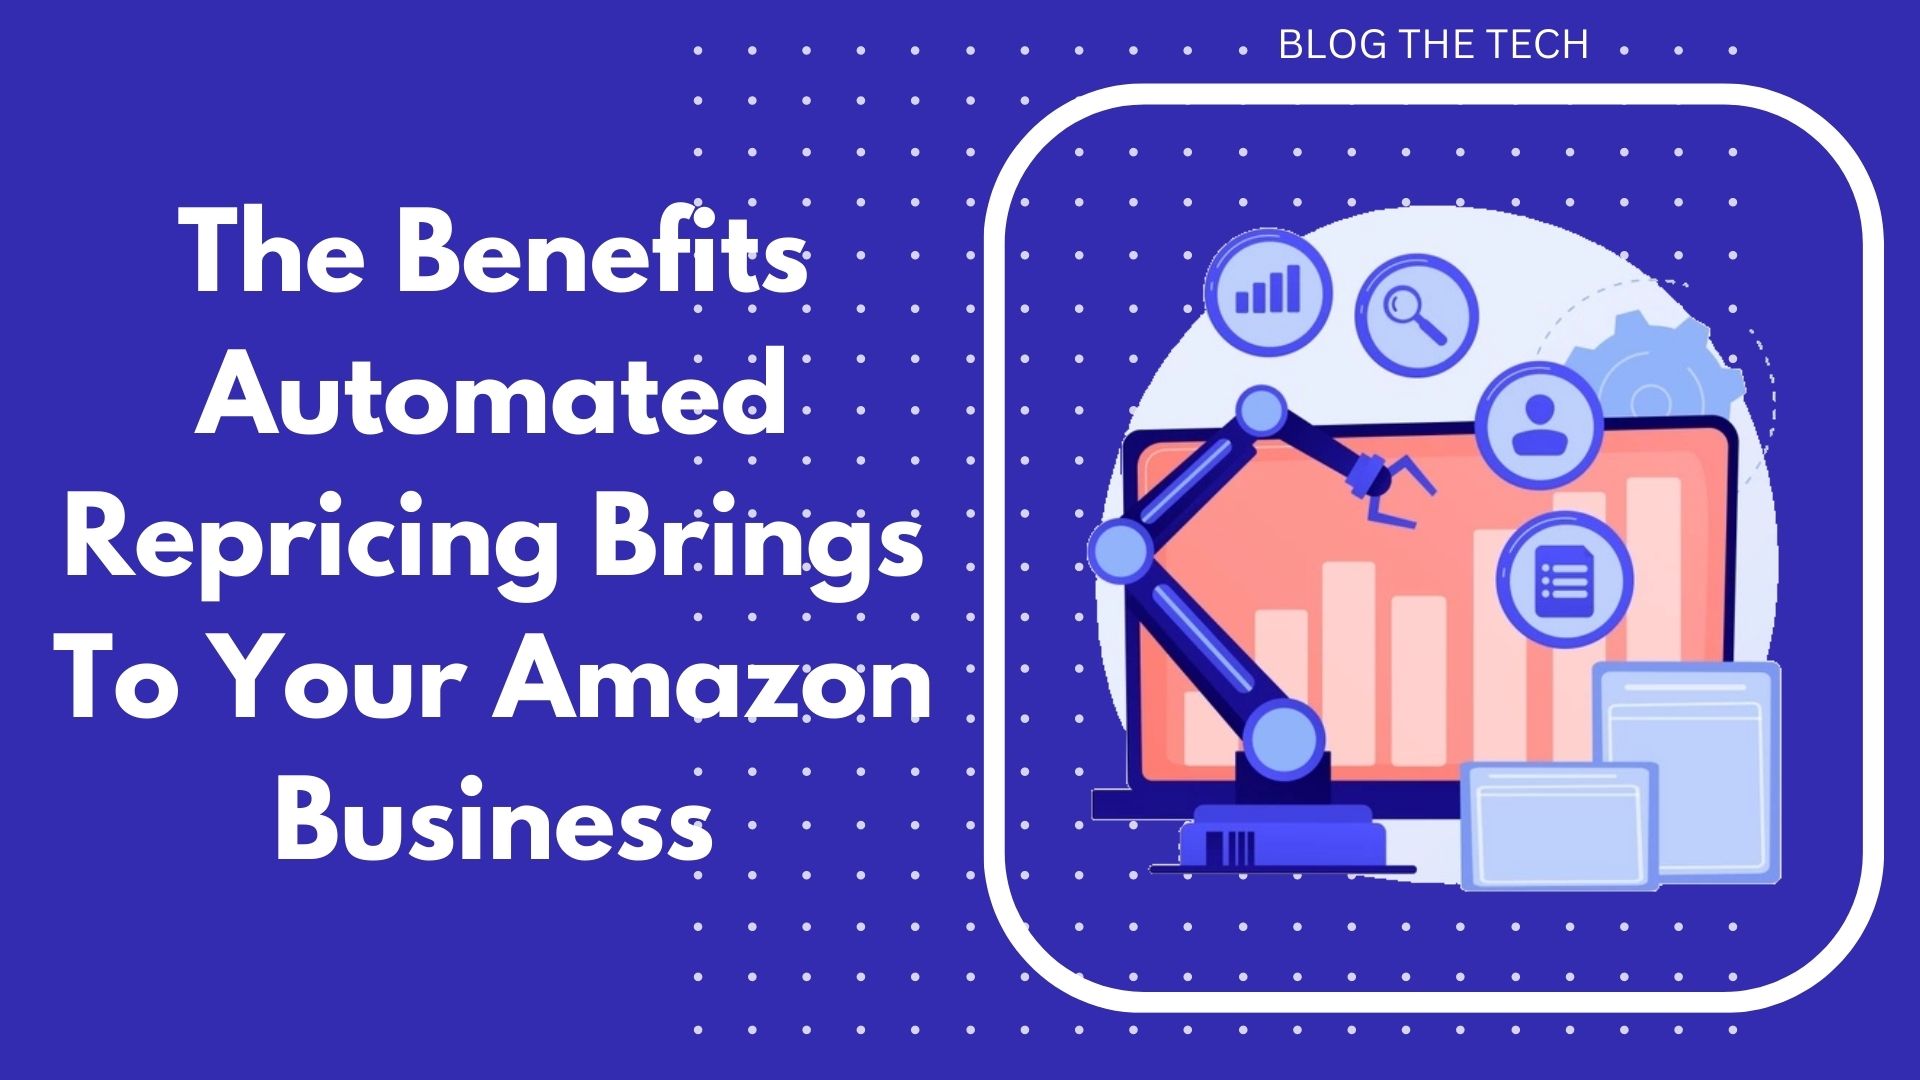 The Benefits Automated Repricing Brings To Your Amazon Business